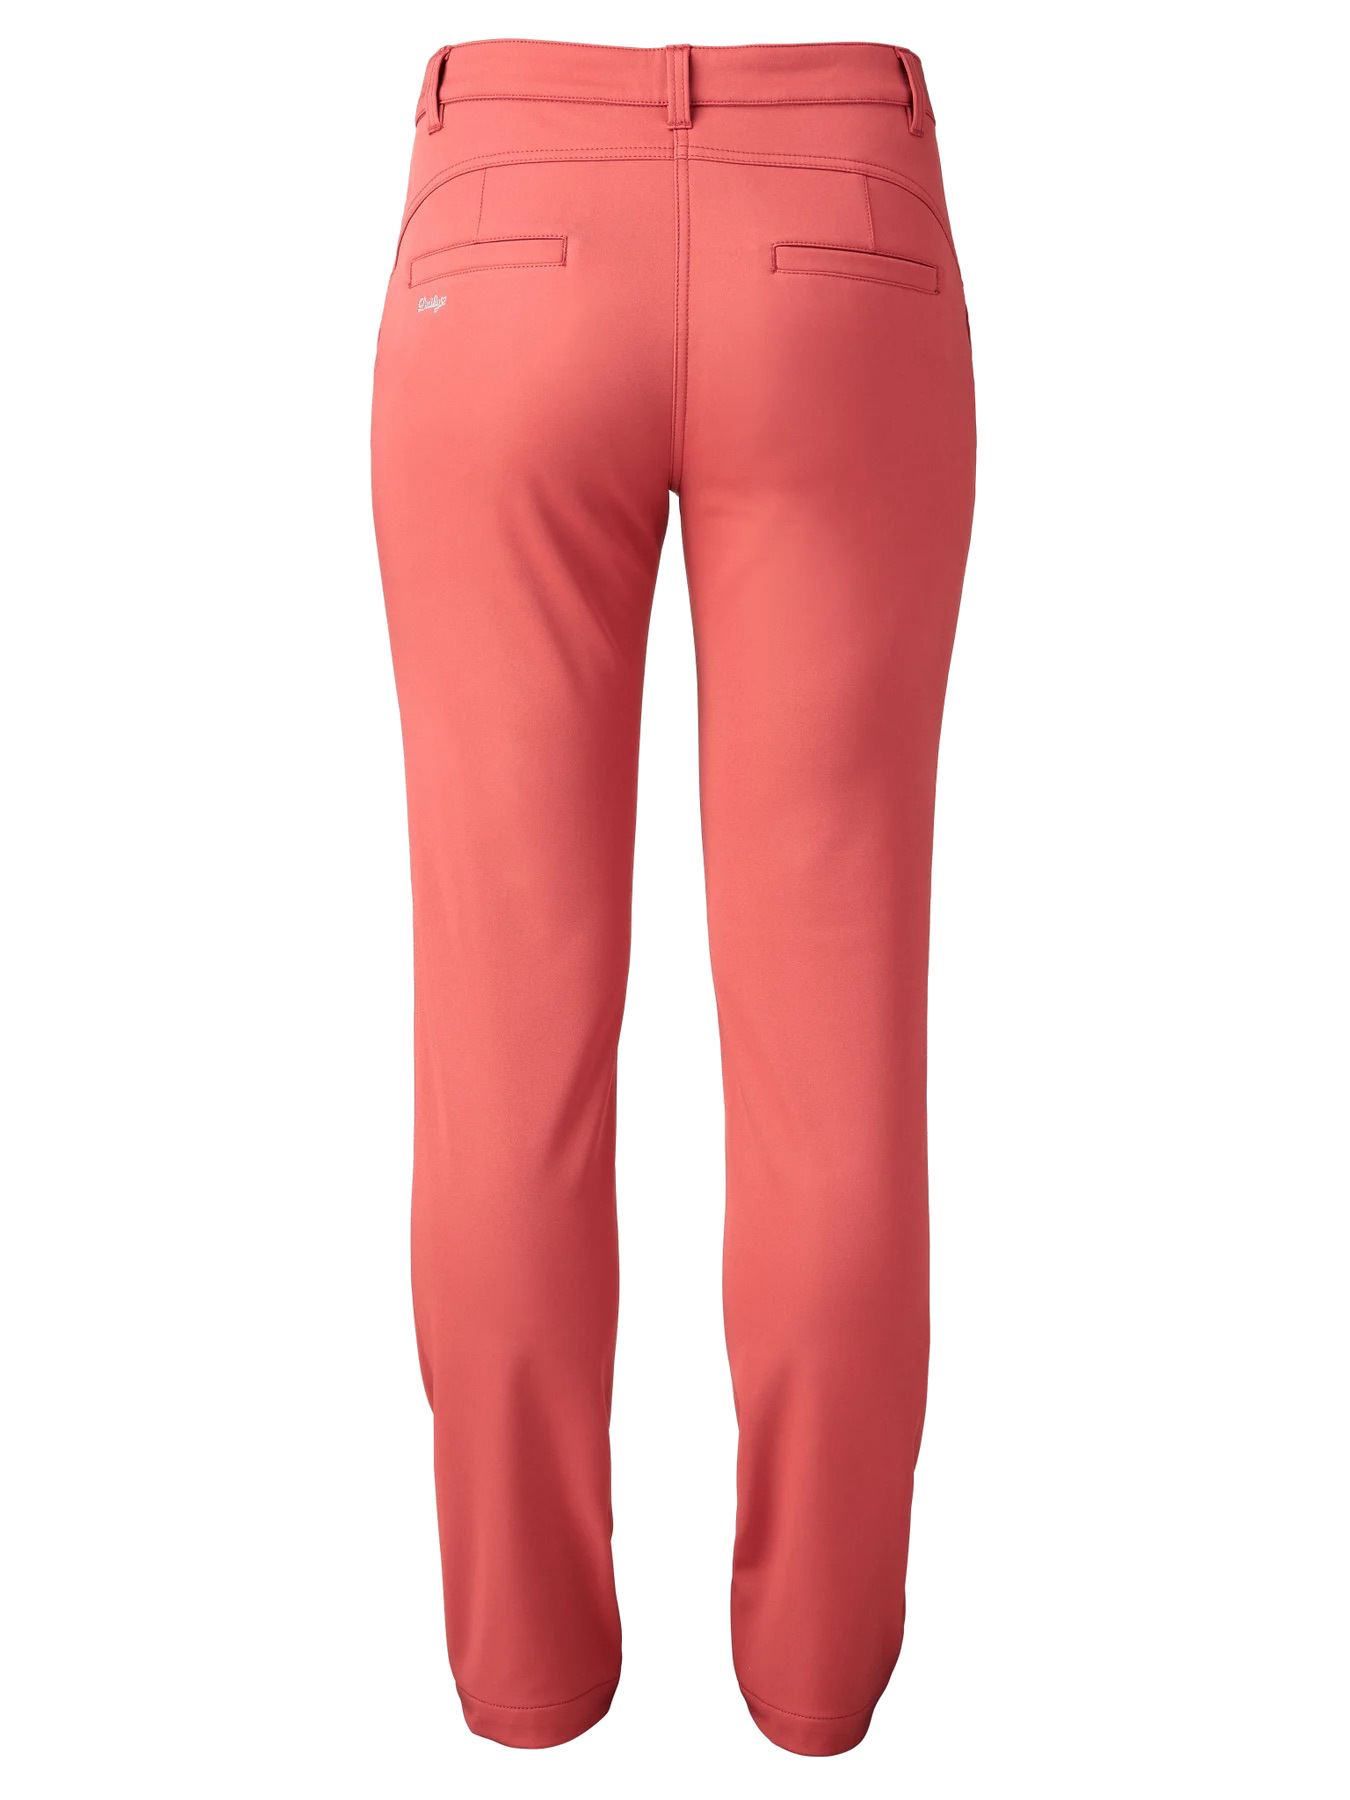 Daily Sports Irene Pants 32 Inch Redwood